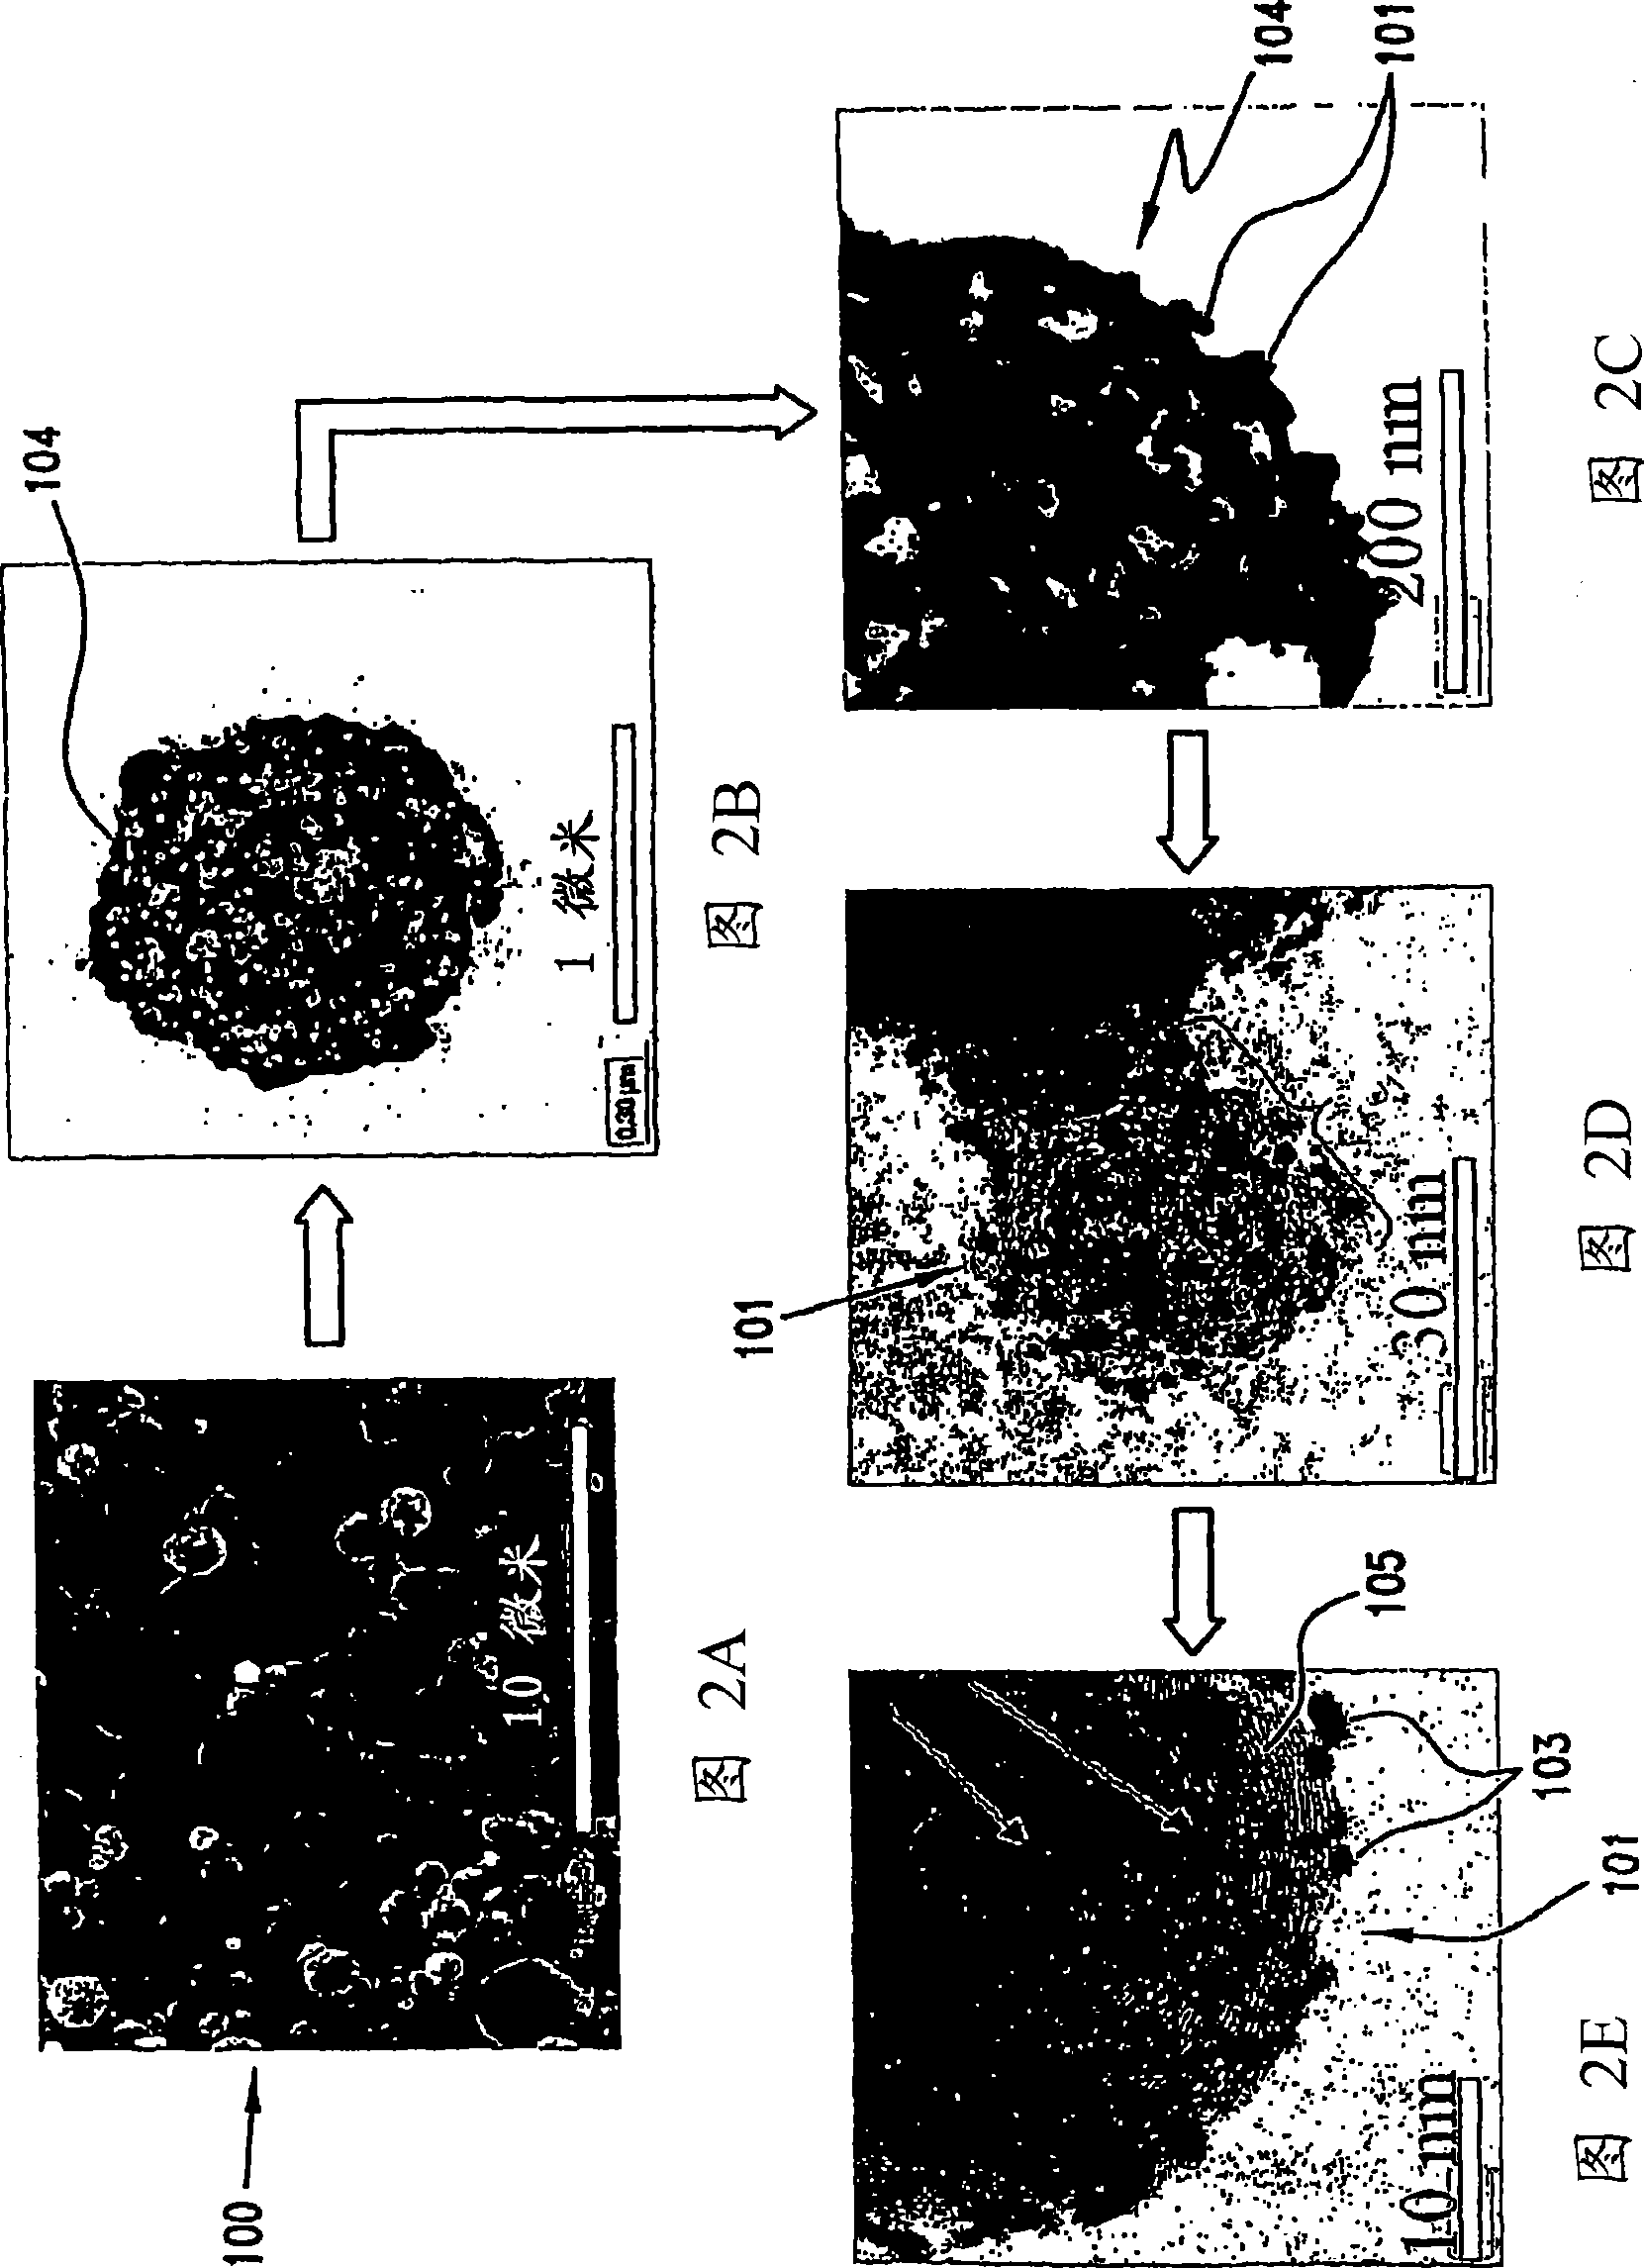 Alloy catalyst compositions and processes for making and using same